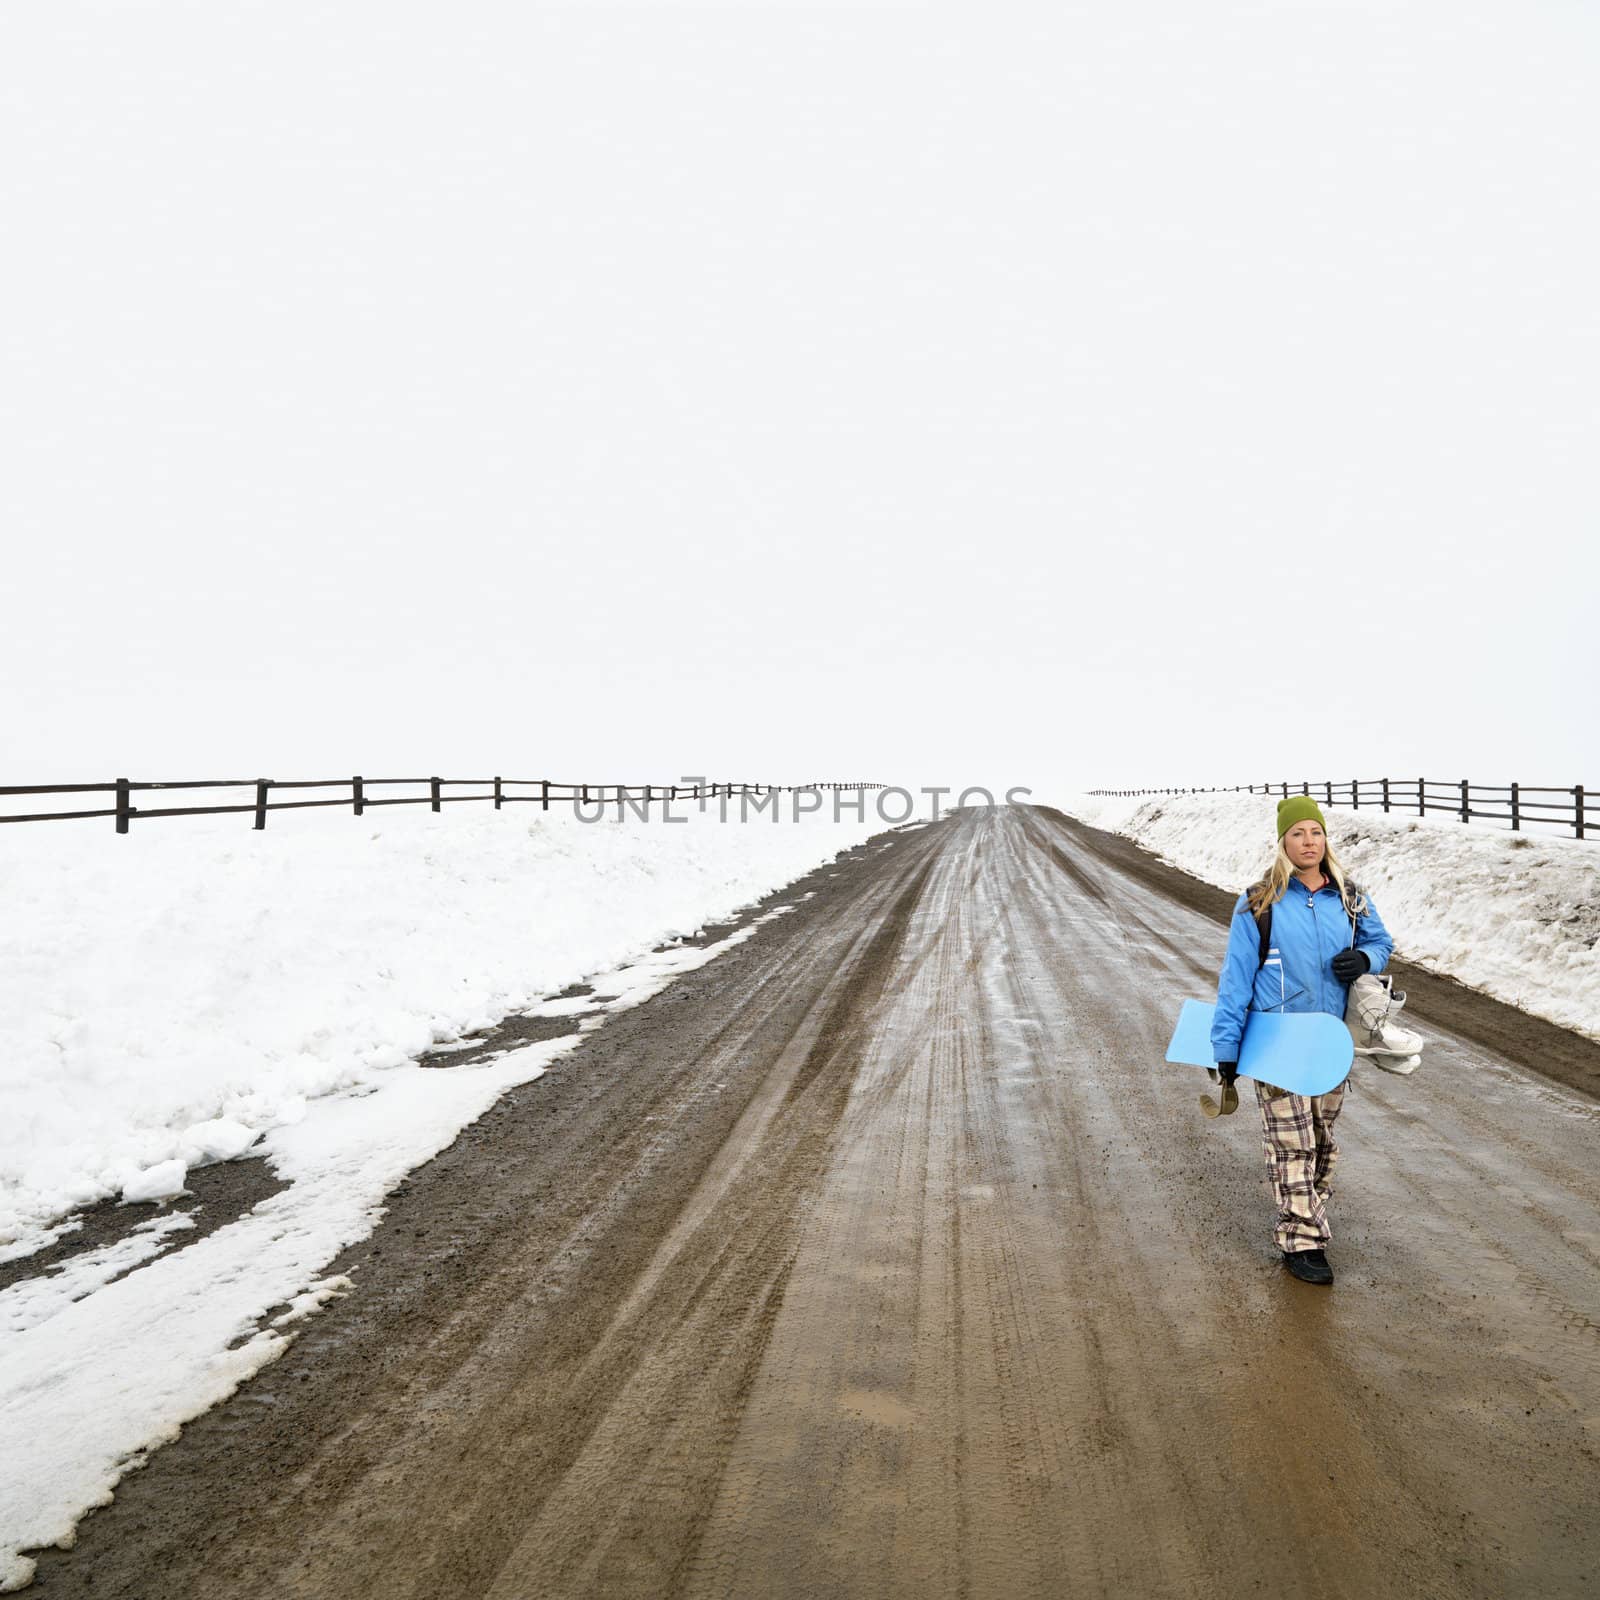 Young woman in winter clothes walking alone down muddy dirt road holding snowboard and boots.